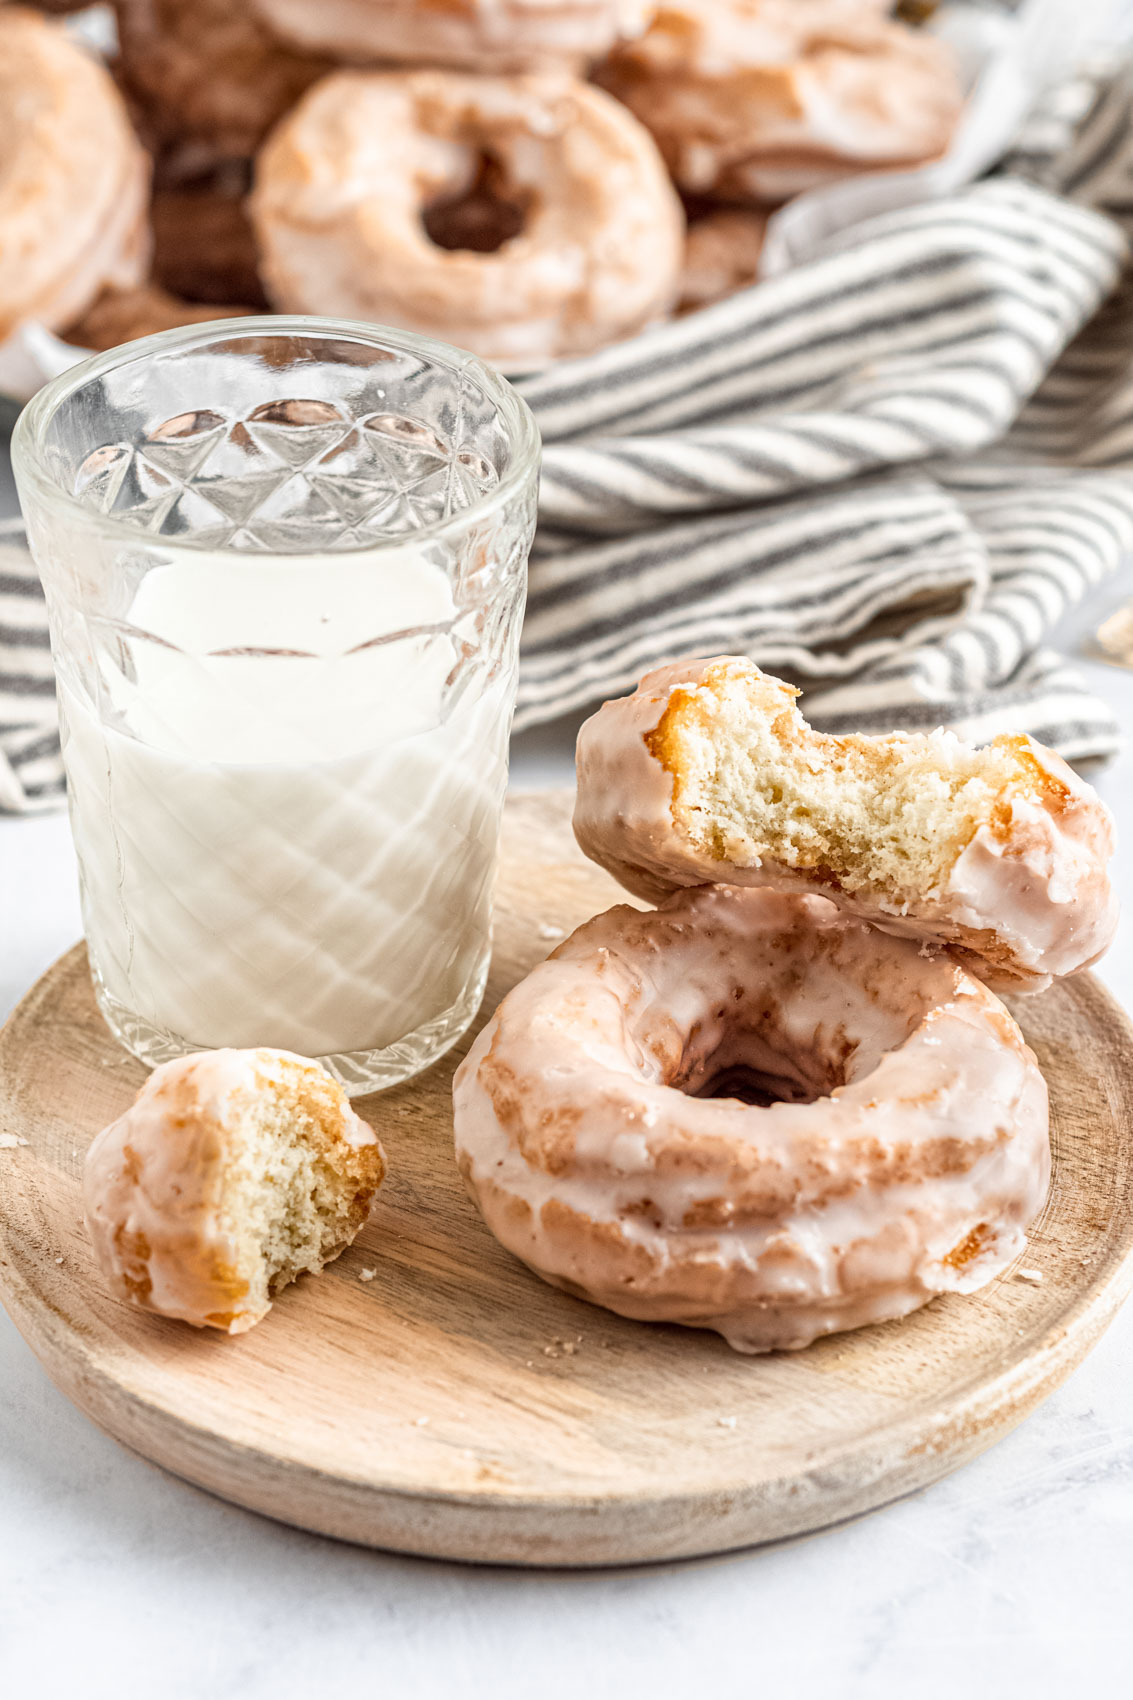 two glazed old-fashioned sour cream donuts with a glass of milk next to a striped linen; one donut has a large bite taken out